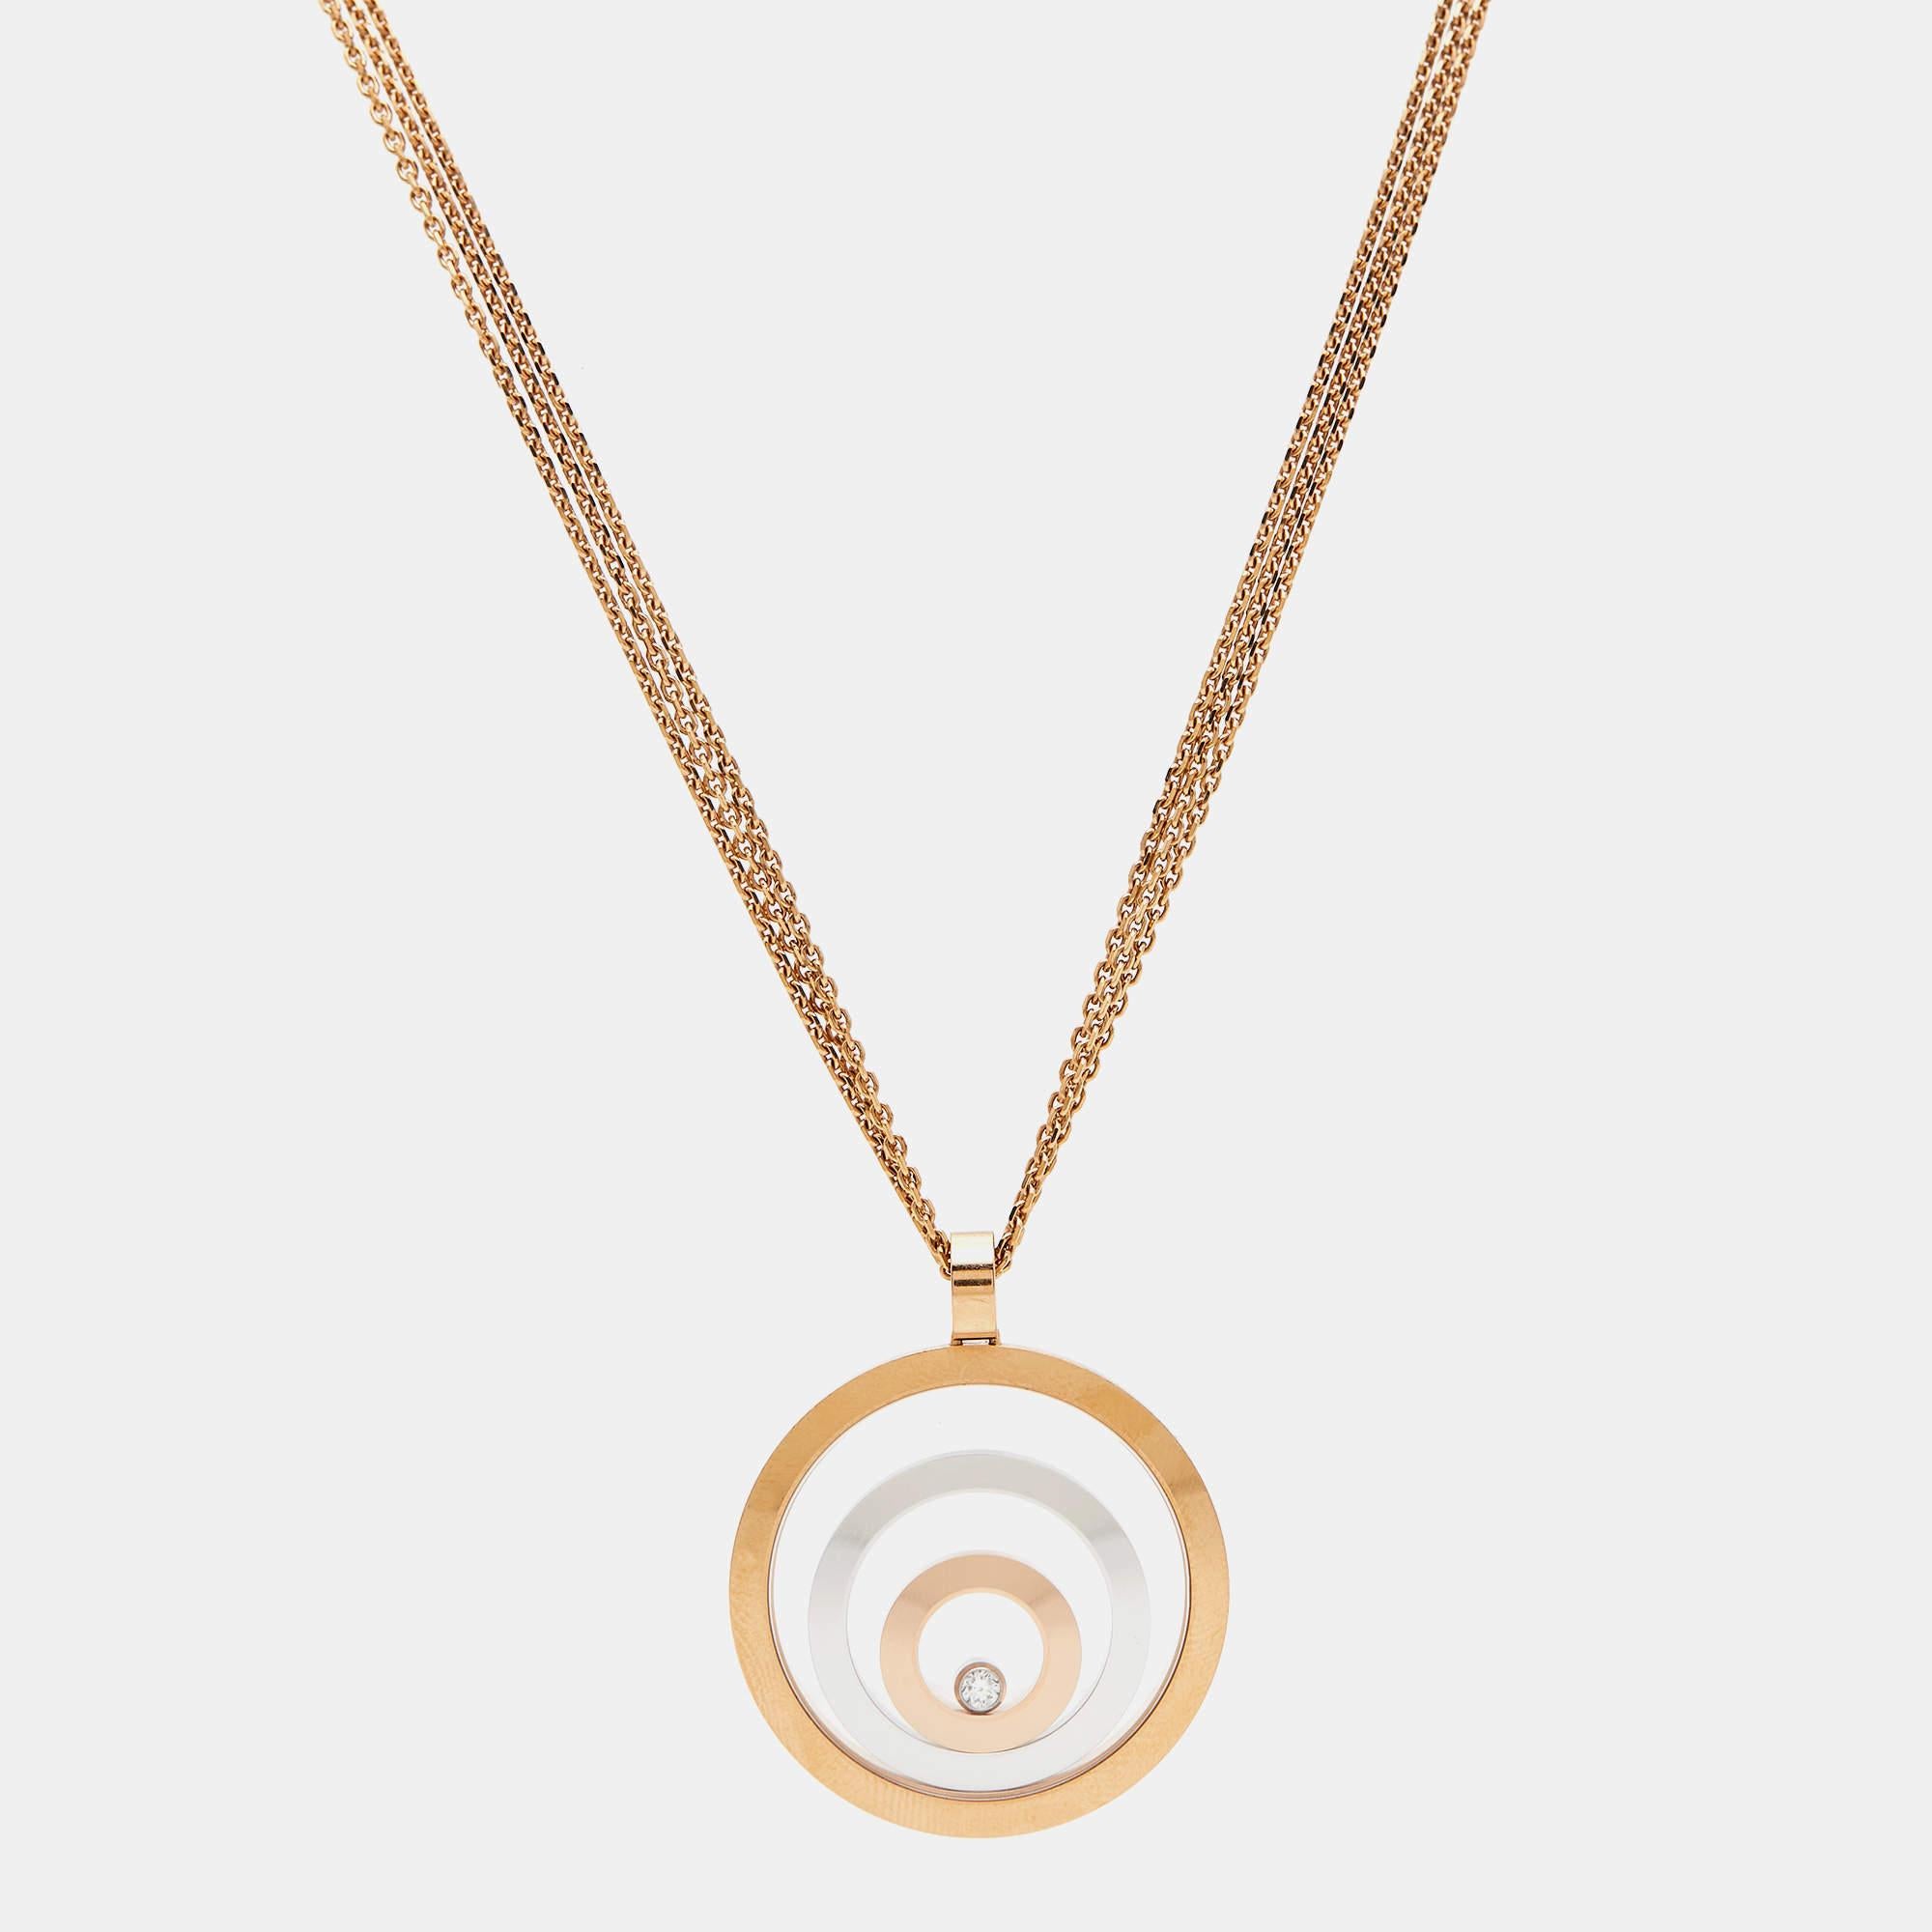 Crafted with precision and finesse, the Chopard Happy Spirit necklace exudes timeless elegance. A harmonious blend of 18k two-tone gold creates a captivating contrast, while delicate craftsmanship enhances its allure. With a floating diamond at its